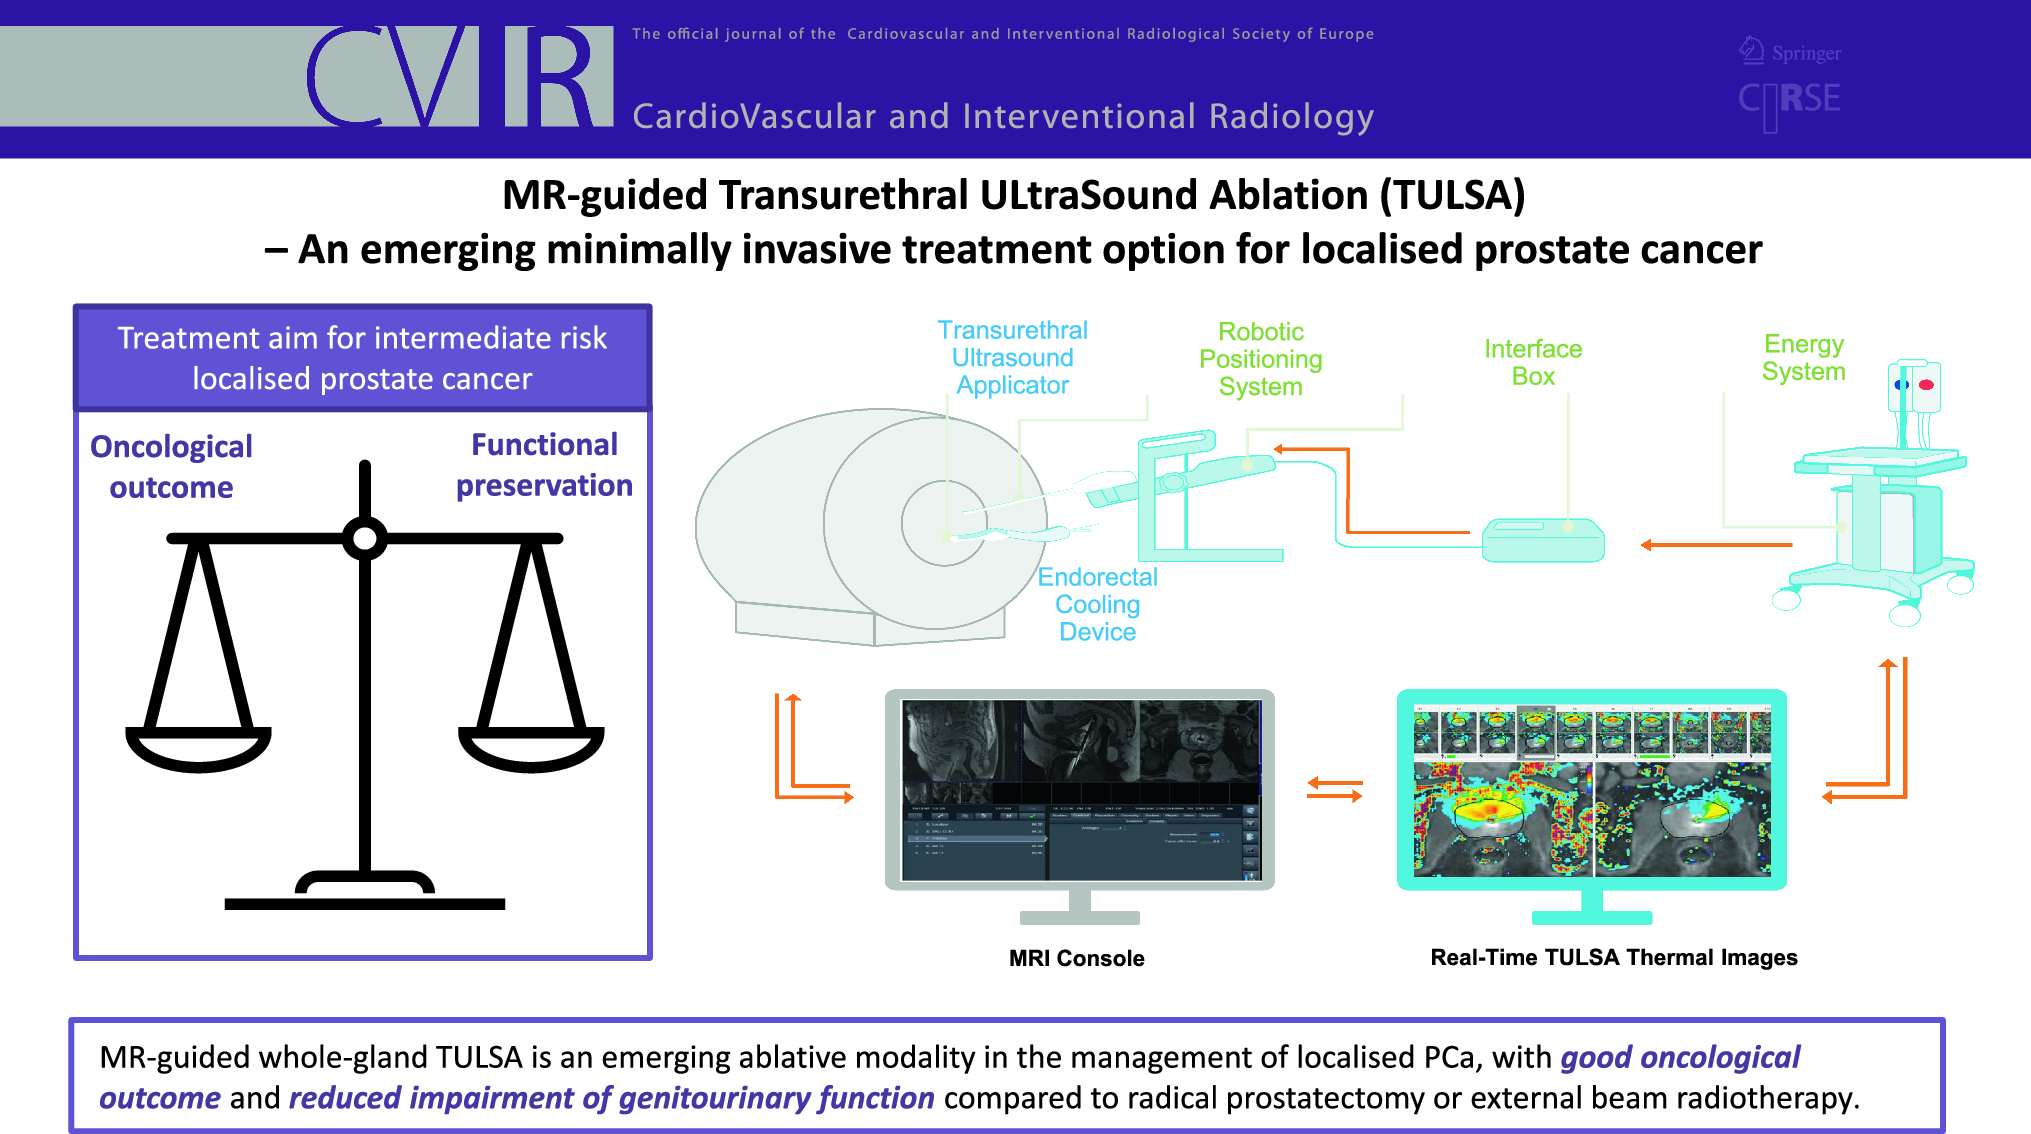 MR-Guided Transurethral Ultrasound Ablation (TULSA)—An Emerging Minimally Invasive Treatment Option for Localised Prostate Cancer